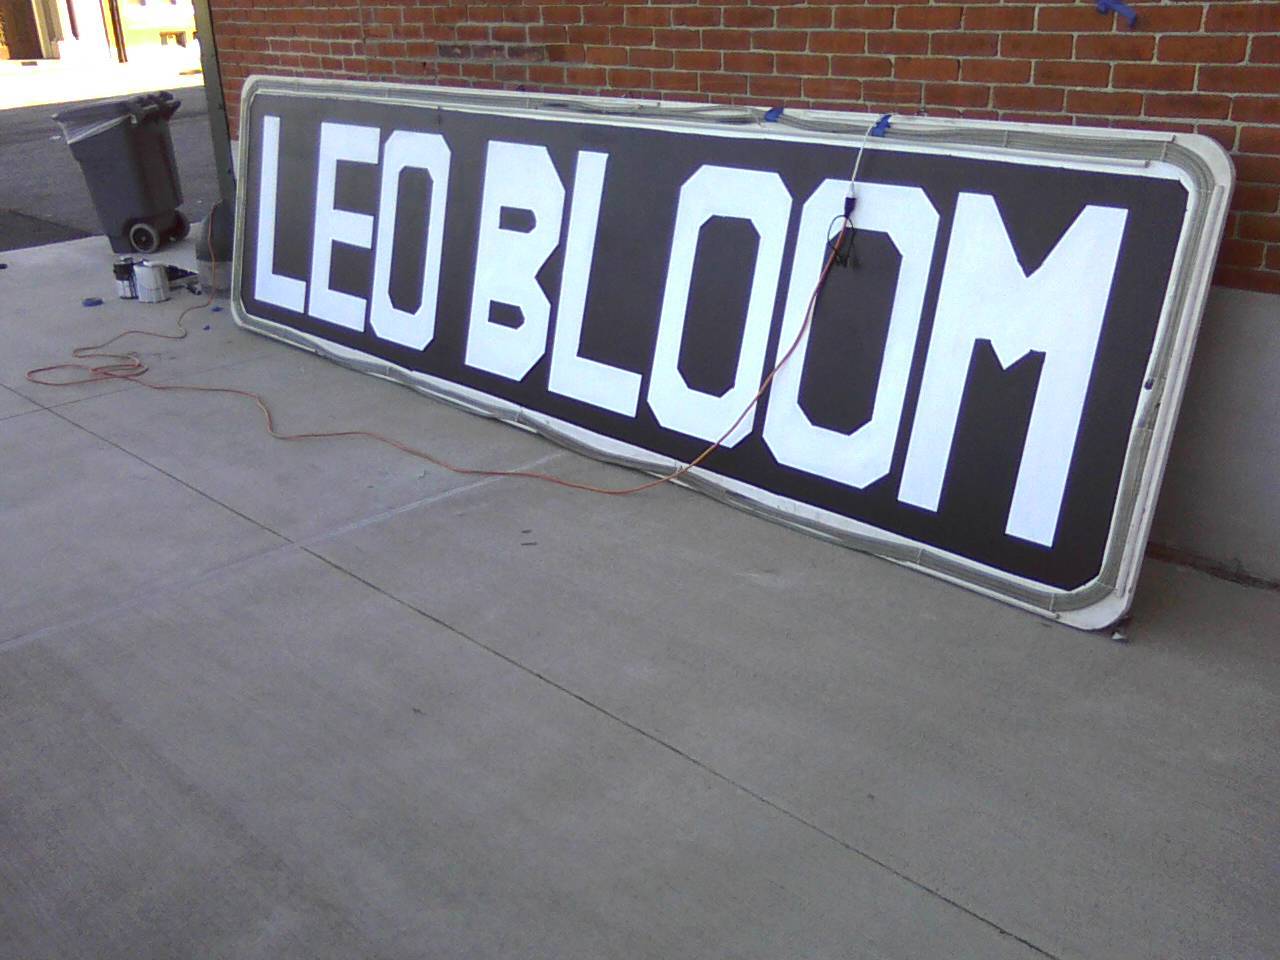 Leo Blooms name up in lights.